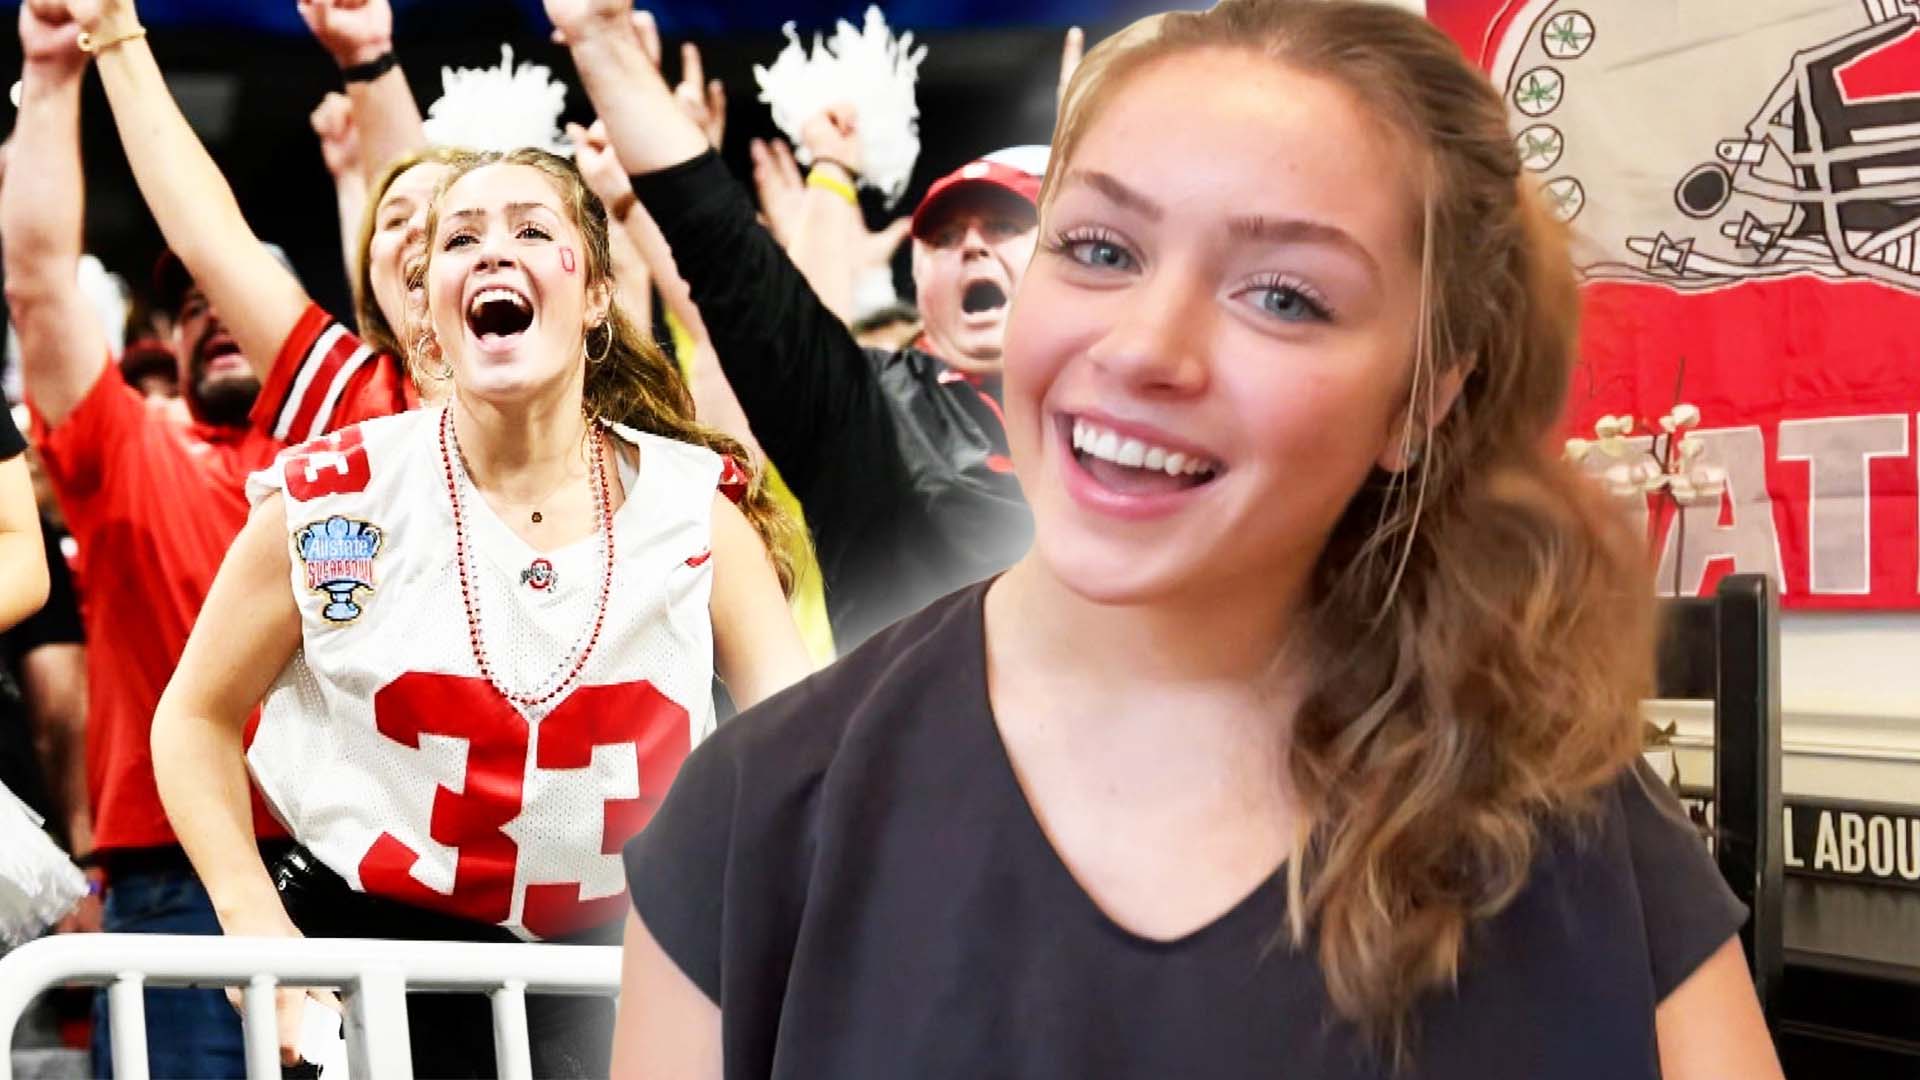 Peach Bowl Girl' is Catherine Gurd, the Younger Sister of Ohio